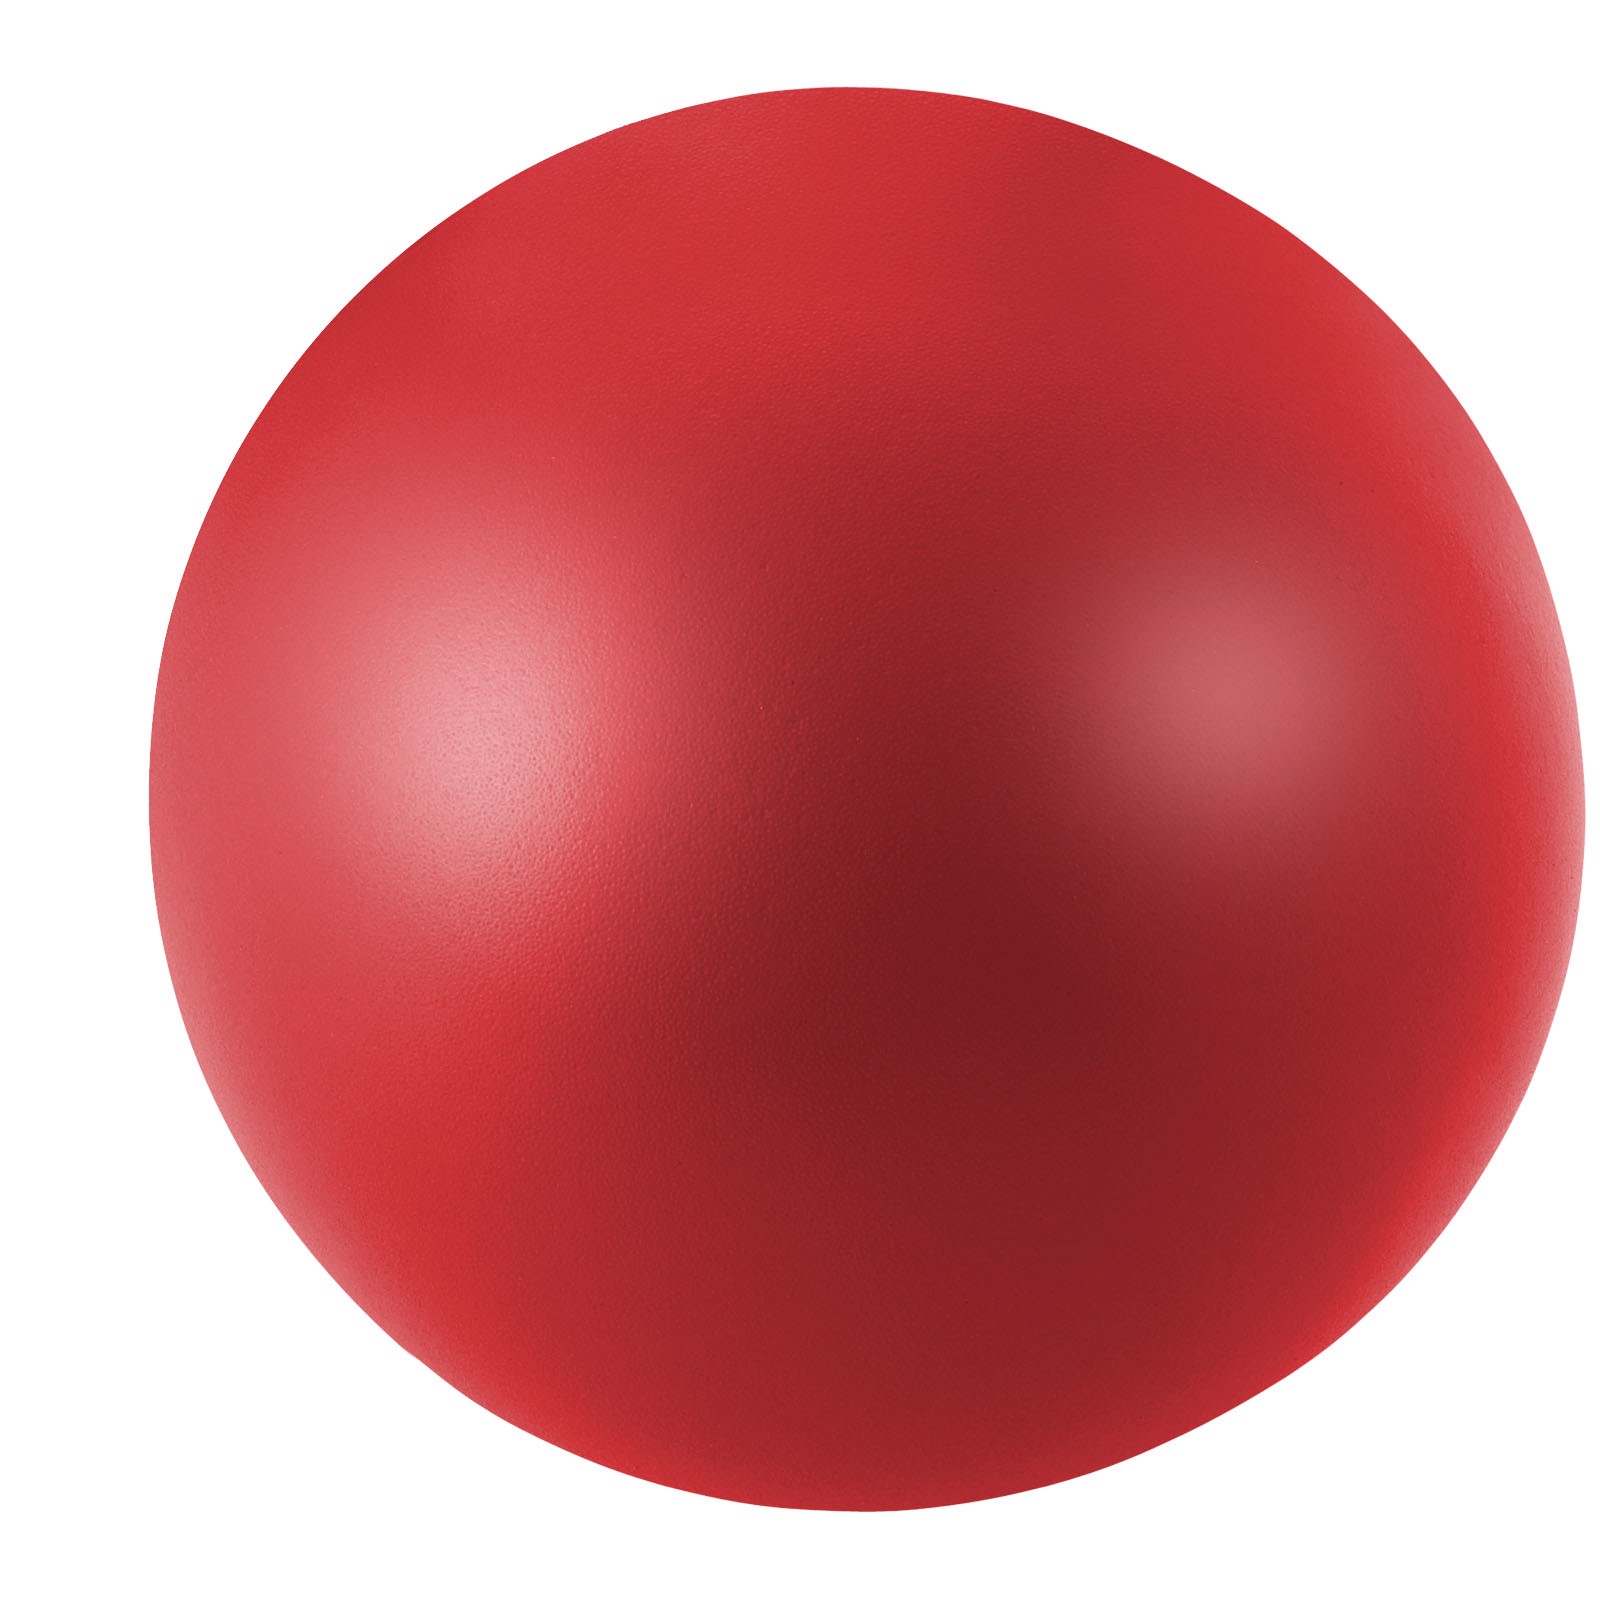 Cool round stress reliever - Red